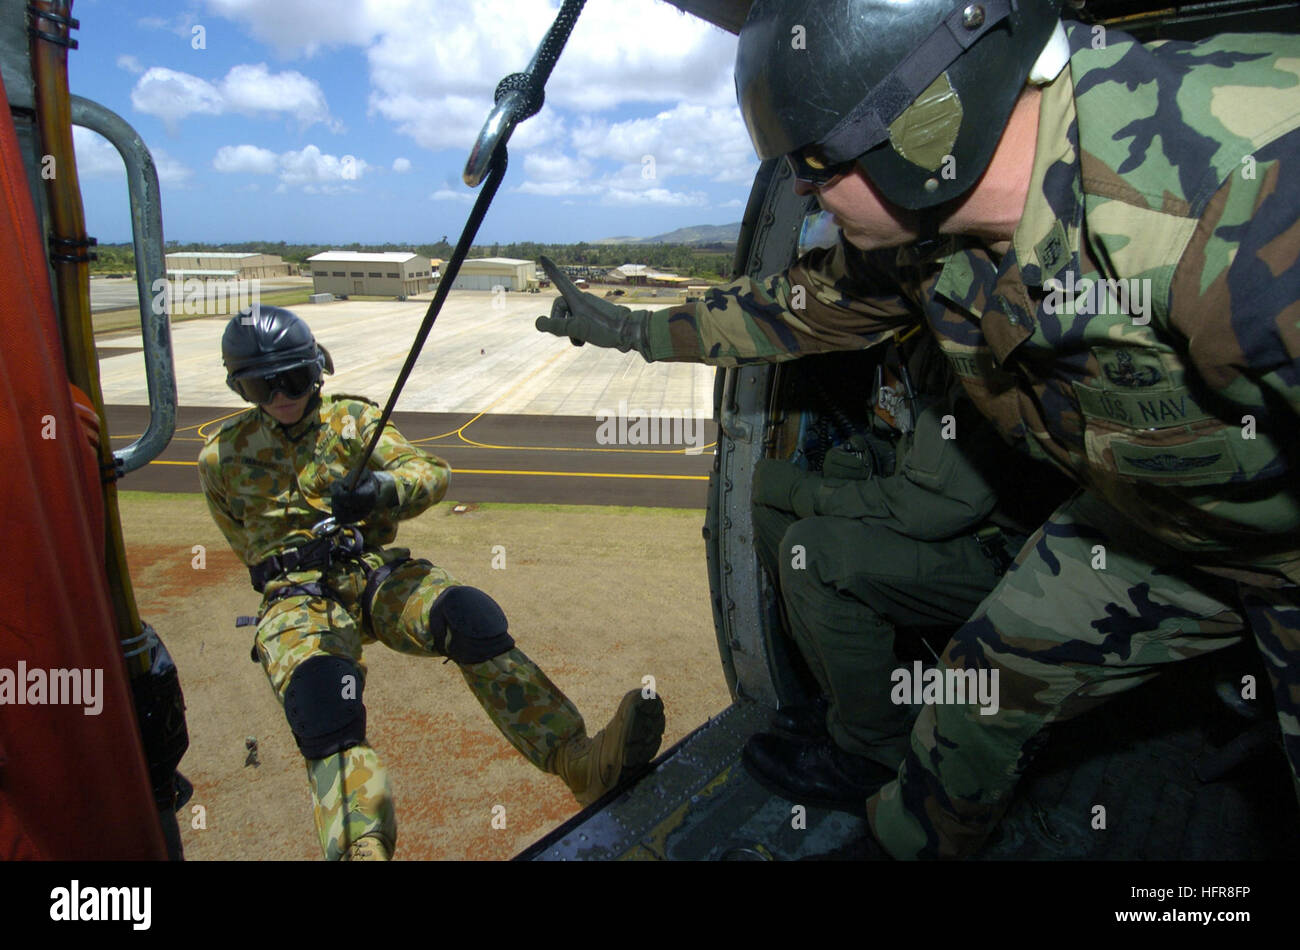 U.S. Navy Chief Lyle White, right, signals to Able Seaman Adam Hubbard of Australia's Clearance Diving Team One as Hubbard prepares to repel from a HH-60H Seahawk helicopter during helicopter rope suspension techniques training as part of exercise Rim of the Pacific (RIMPAC) at Wheeler Army Airfield, Hawaii, July 8, 2006. RIMPAC brings together military forces from Australia, Canada, Chile, Peru, Japan, the Republic of Korea, the United Kingdom and the United States in the world's largest biennial maritime exercise. White is a master explosive ordnance disposalman from Explosive Ordnance Dispo Stock Photo